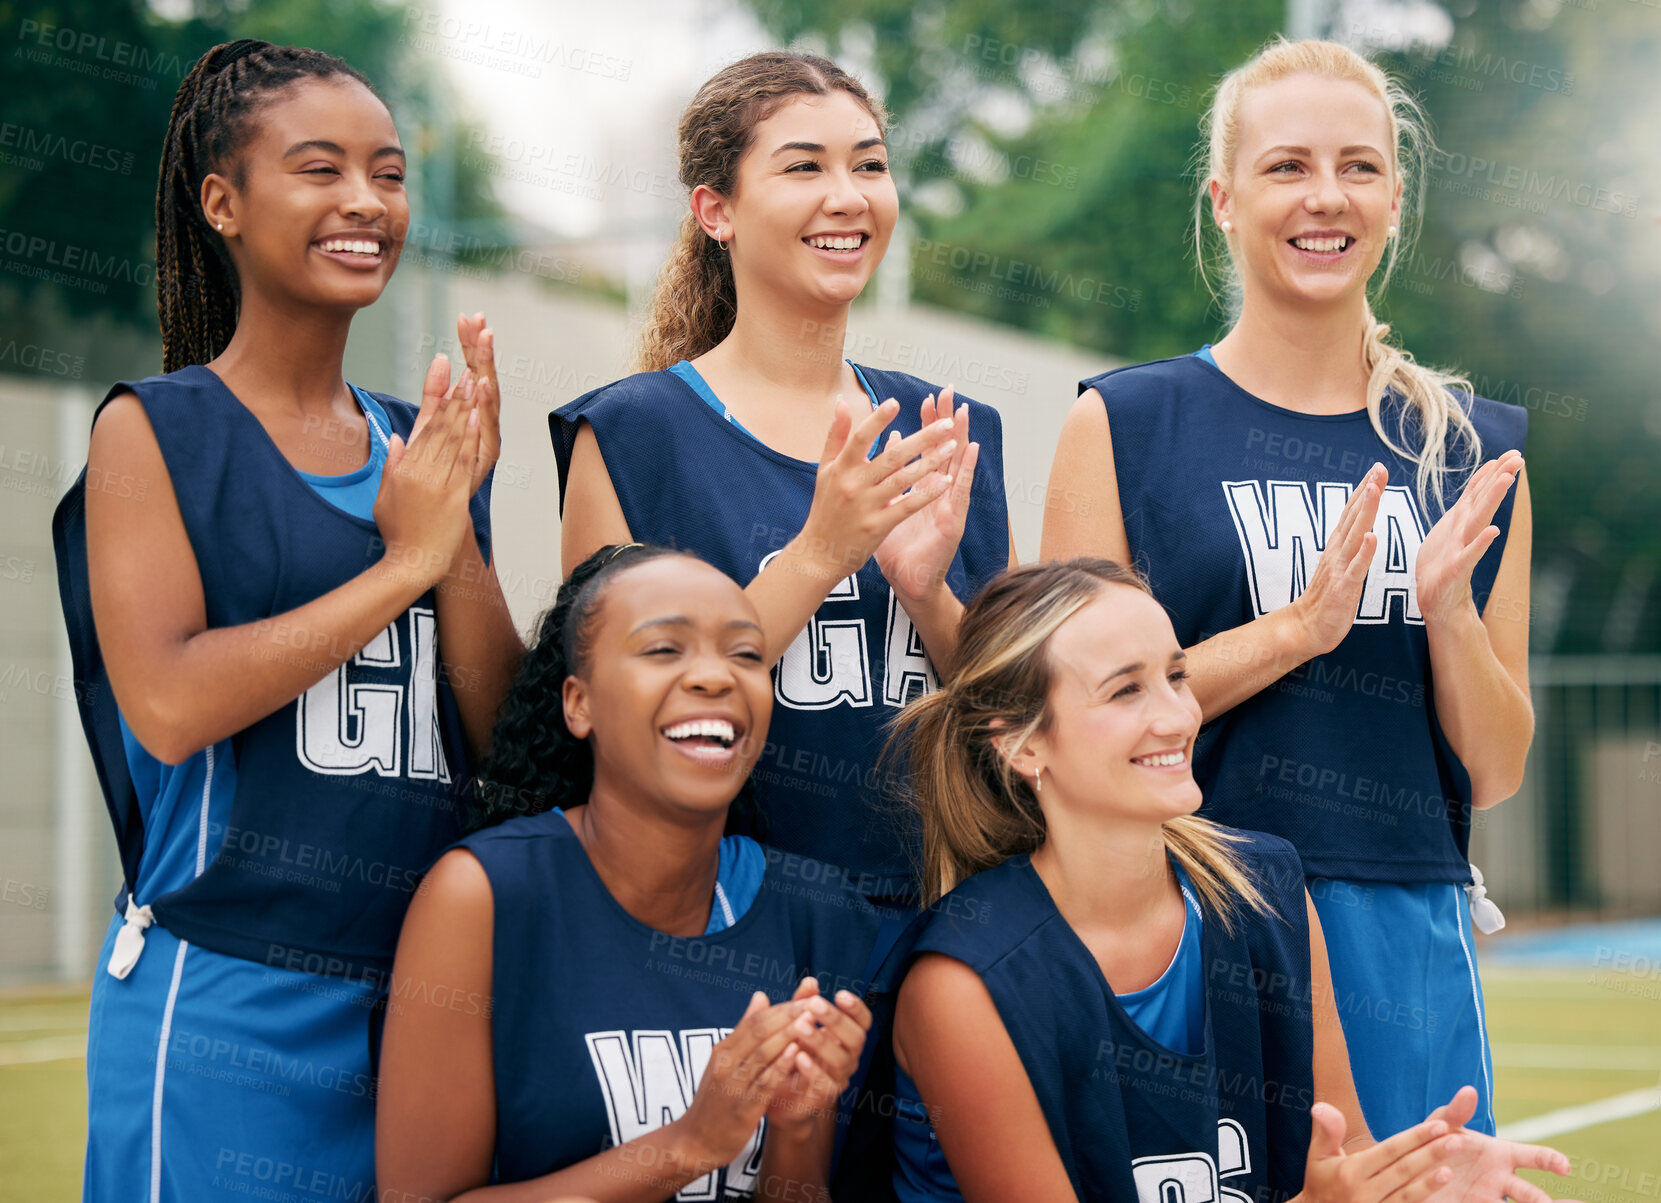 Buy stock photo Netball, sports and women team applause, cheers and celebrate game, competition or training outdoor field support, motivation and teamwork. Happy athlete girl group clapping hands for winner goal